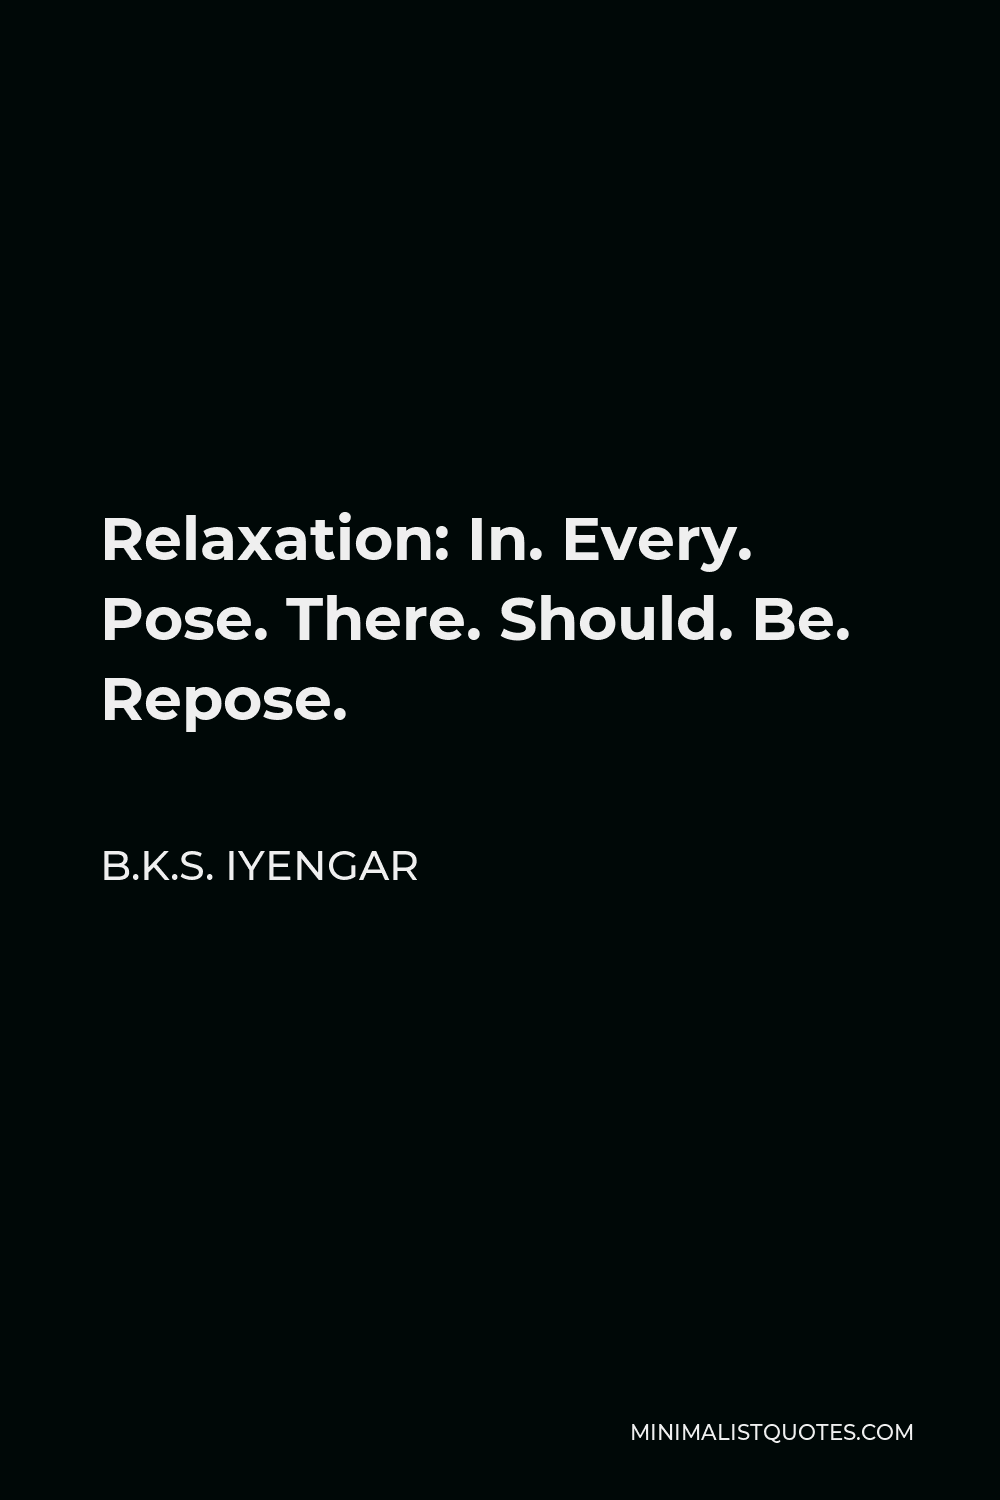 B.K.S. Iyengar Quote - Relaxation: In. Every. Pose. There. Should. Be. Repose.